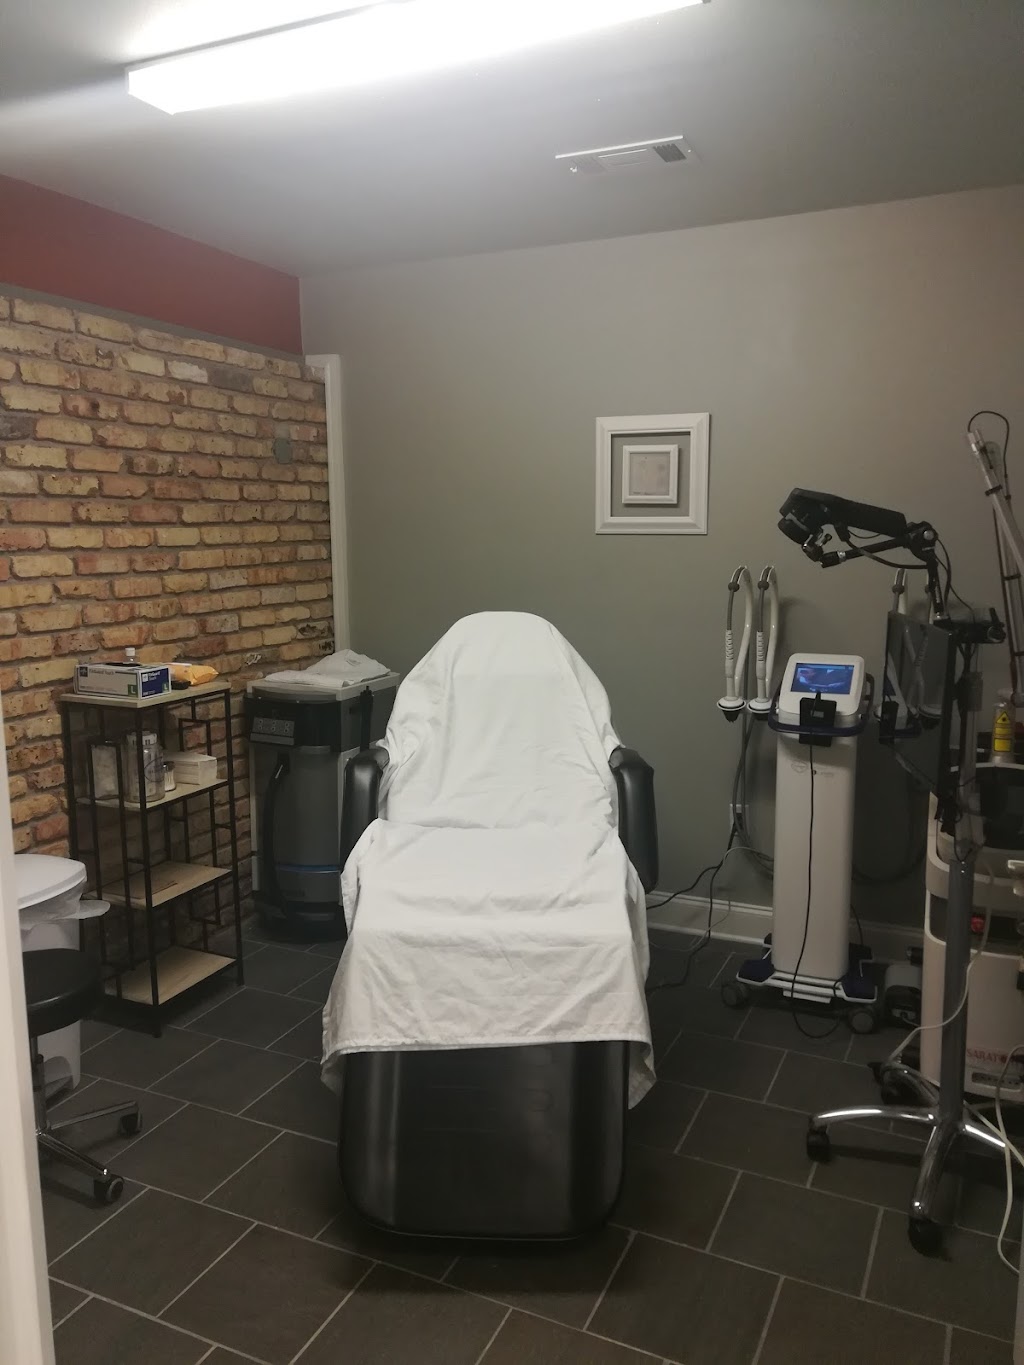 Glow Medical Aesthetics | 200 Country Club Rd, Carriere, MS 39426, USA | Phone: (769) 242-0691